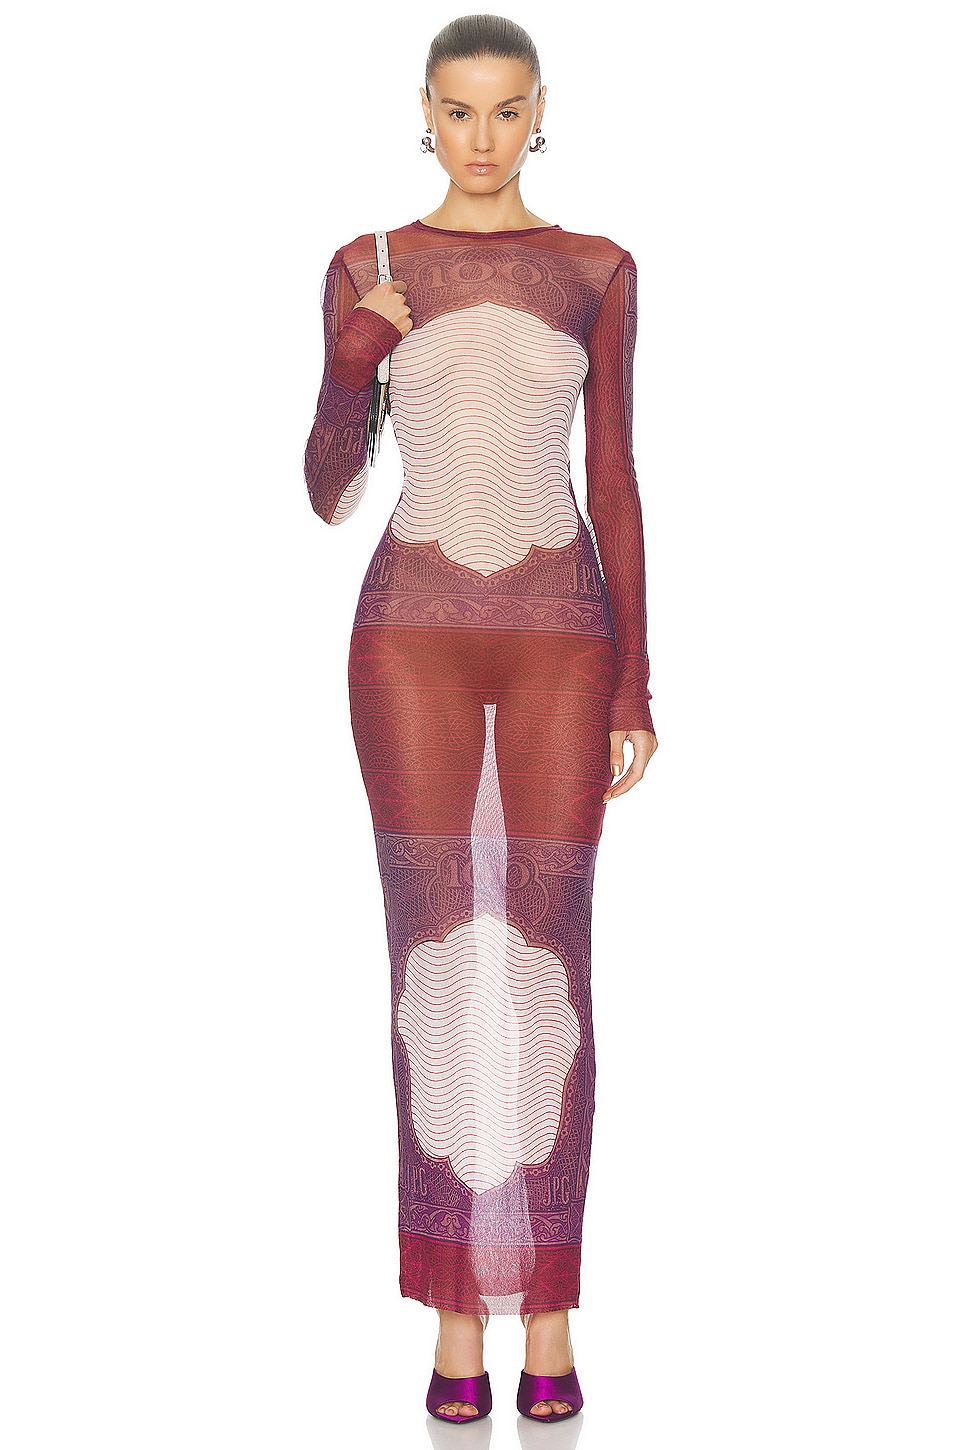 Image 1 of Jean Paul Gaultier Cartouche Mesh Long Sleeve Dress in Red, White, & Burgundy